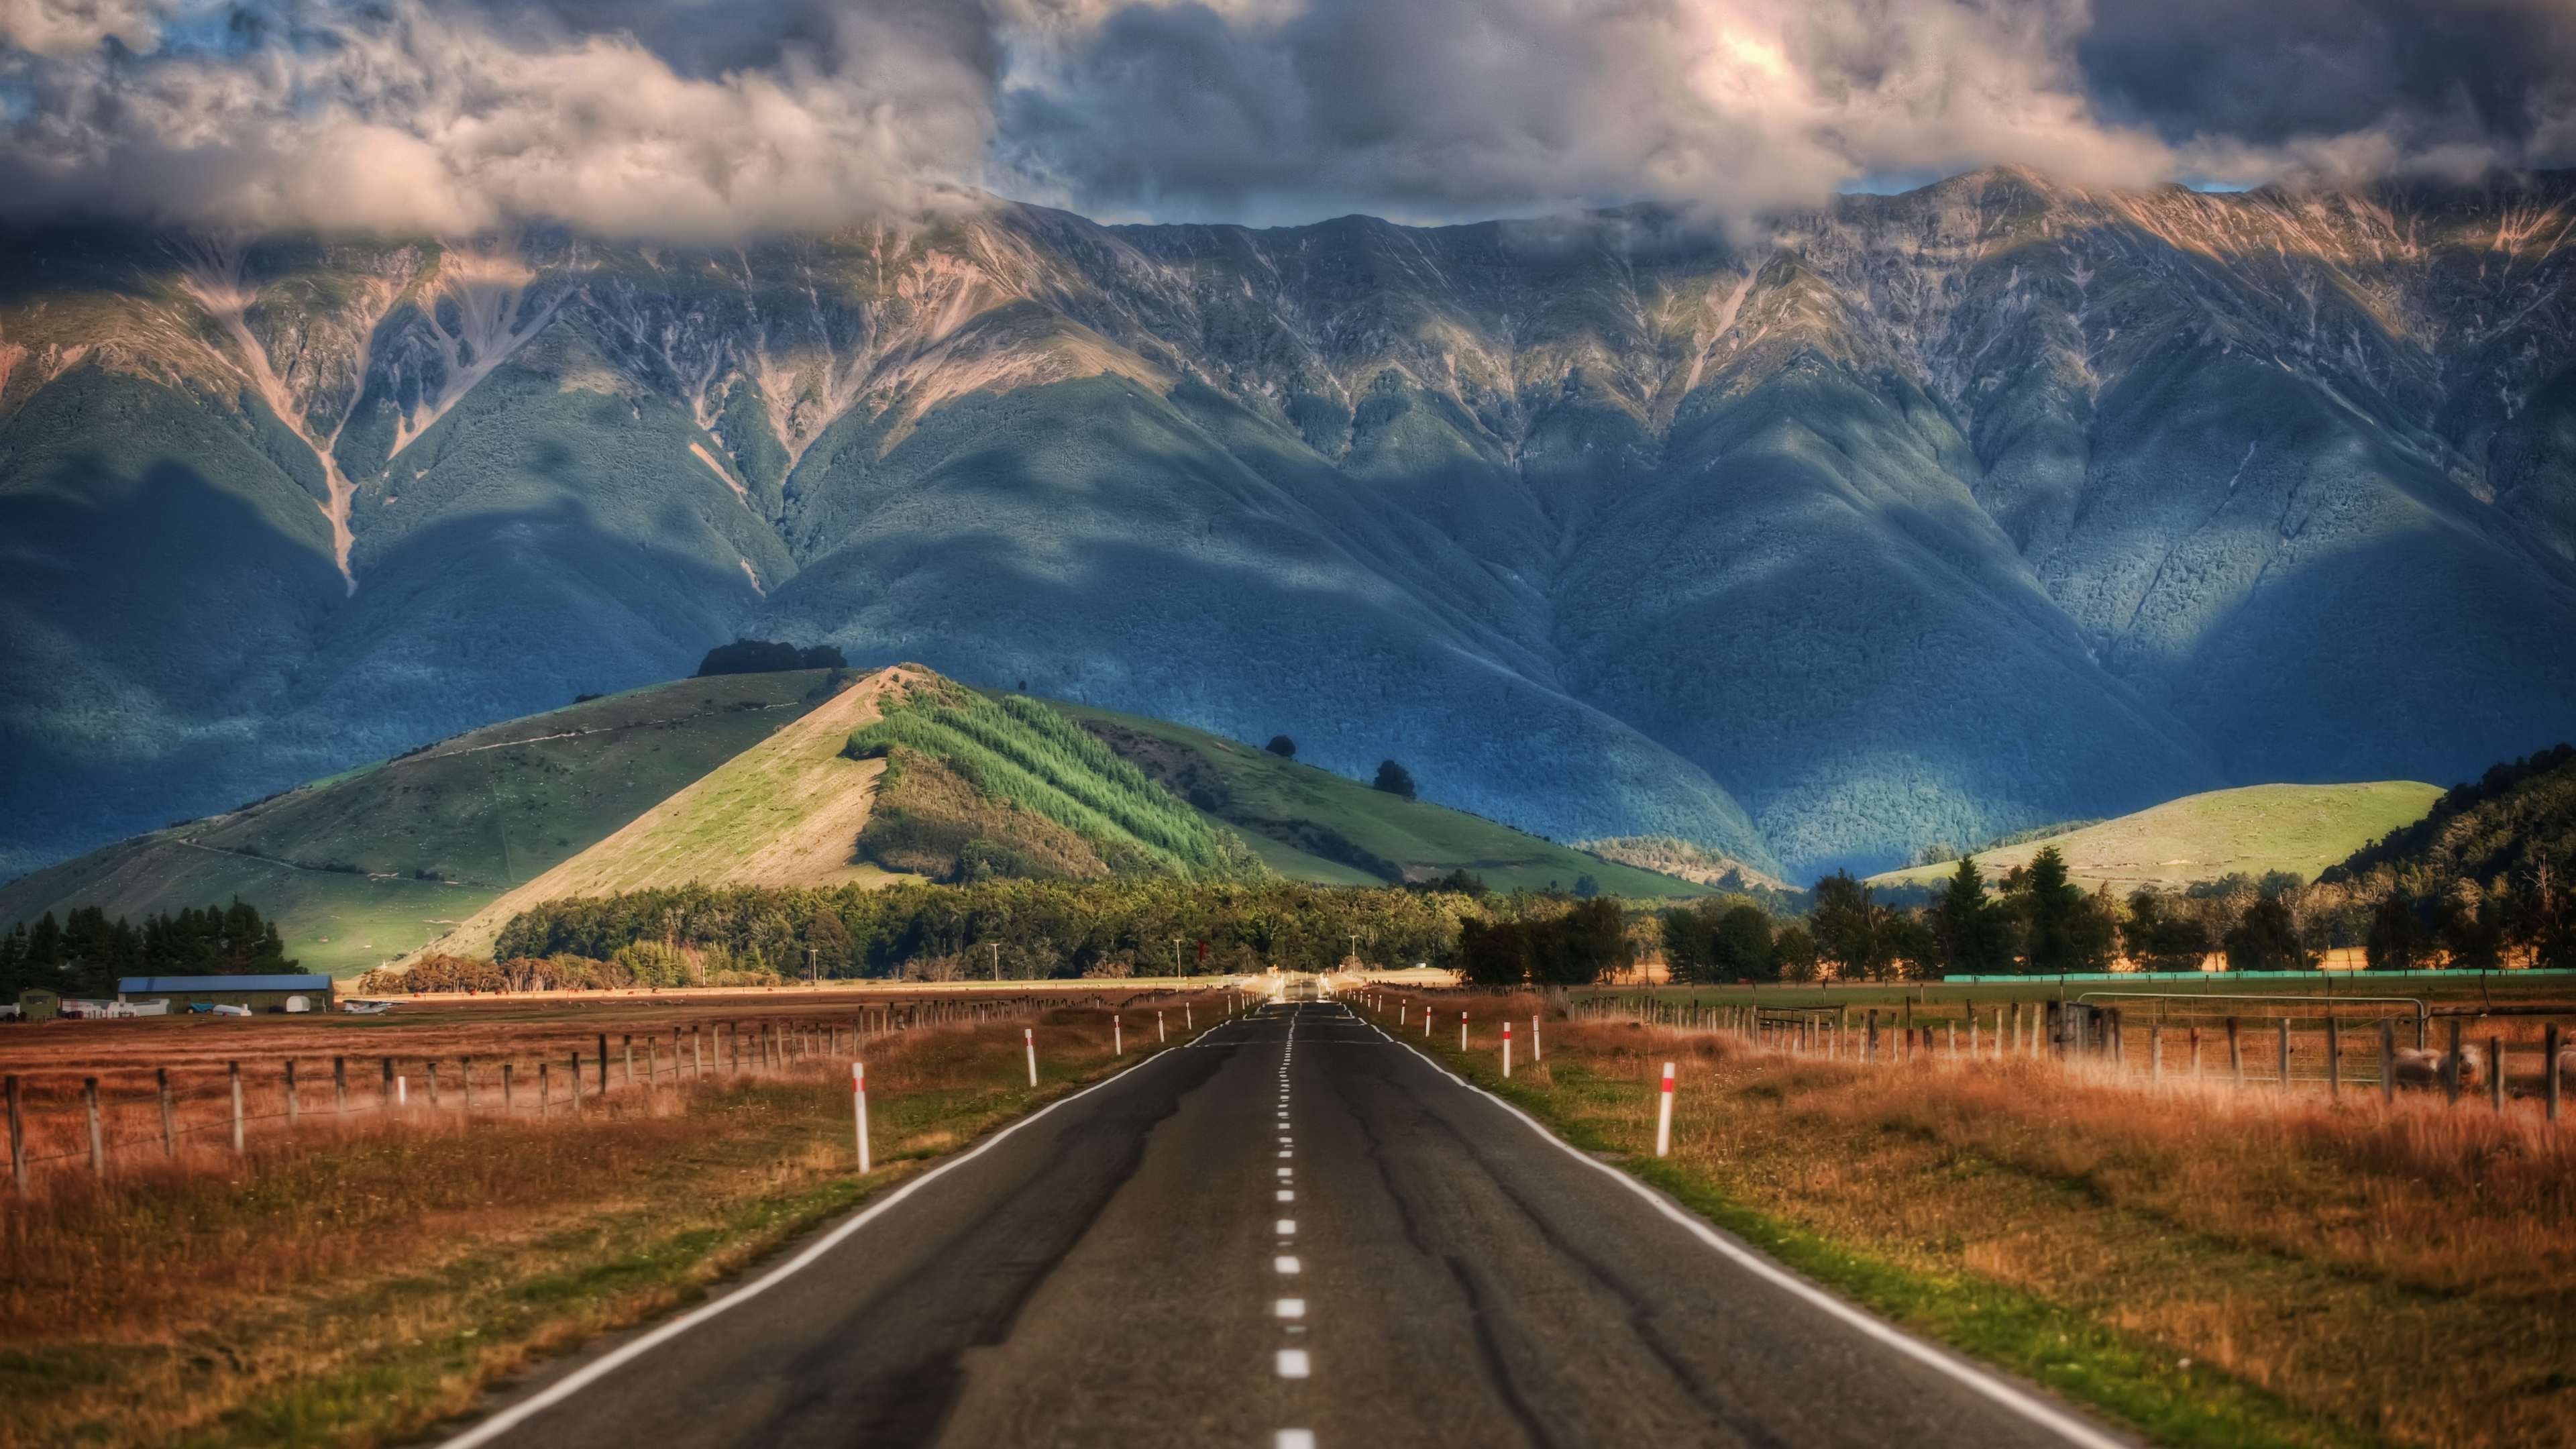 General 3840x2160 Trey Ratcliff photography landscape 4K New Zealand nature road mountains grass mountain chain clouds hills trees